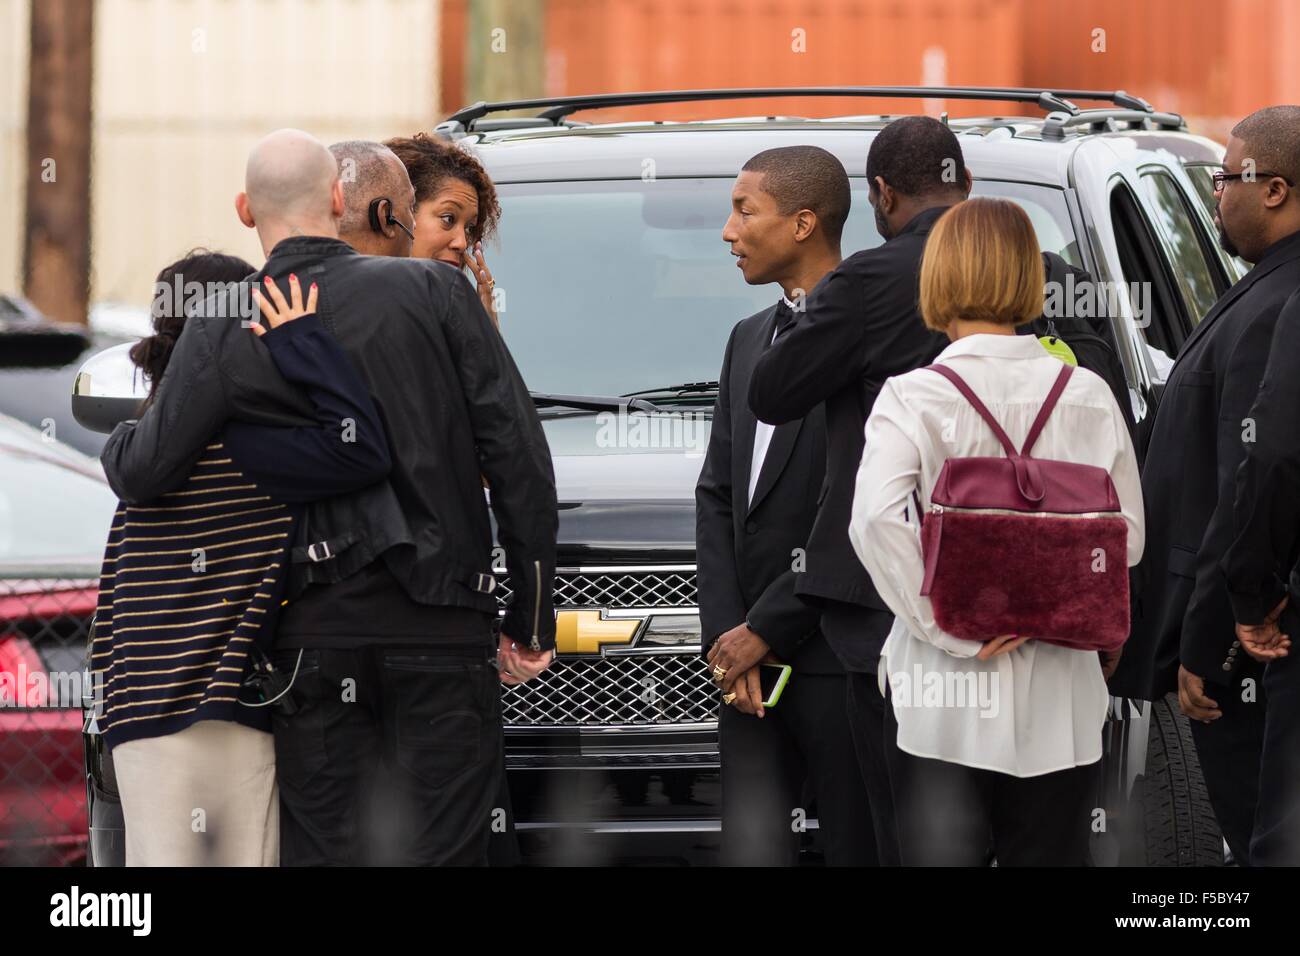 Superstar Pharrell Williams arrives at the historic Mother Emanuel AME Church to perform with the Gospel Choir during Sunday service November 1, 2015 in Charleston, South Carolina. The church was the site of the mass shooting that killed nine-people in June 2015 and will be featured as part of a program on race relations being produced by A+E Networks. Stock Photo